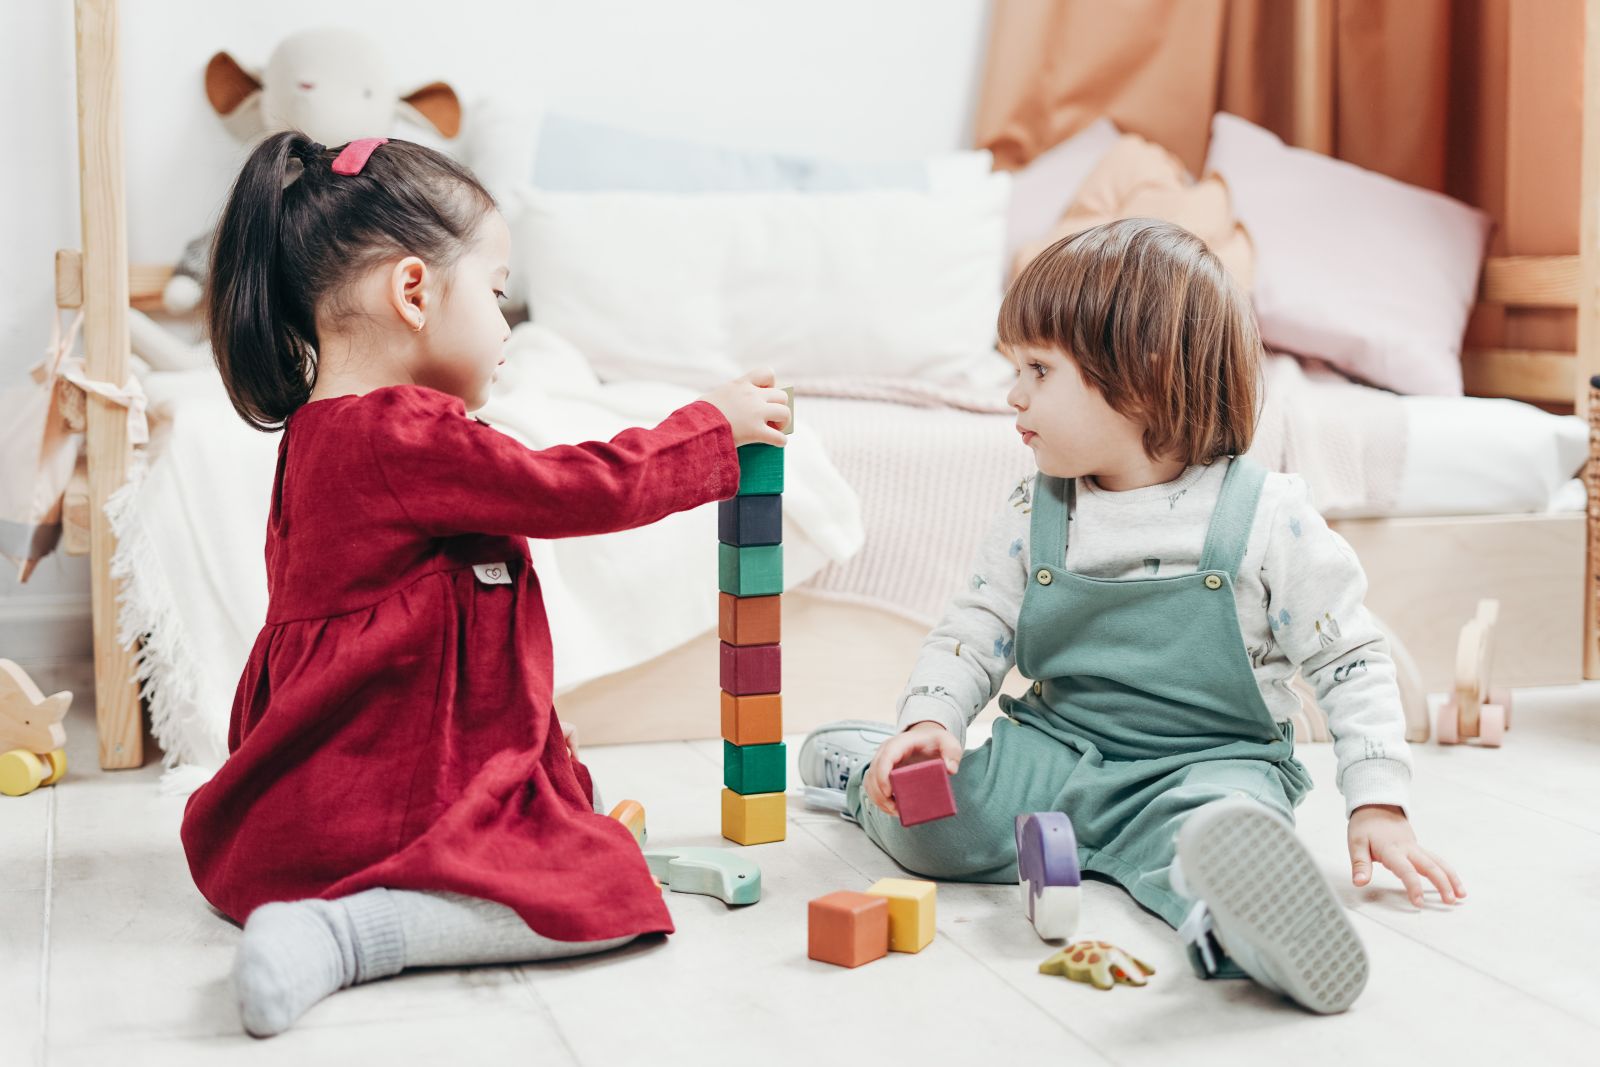 Kids playing wooden blocks together